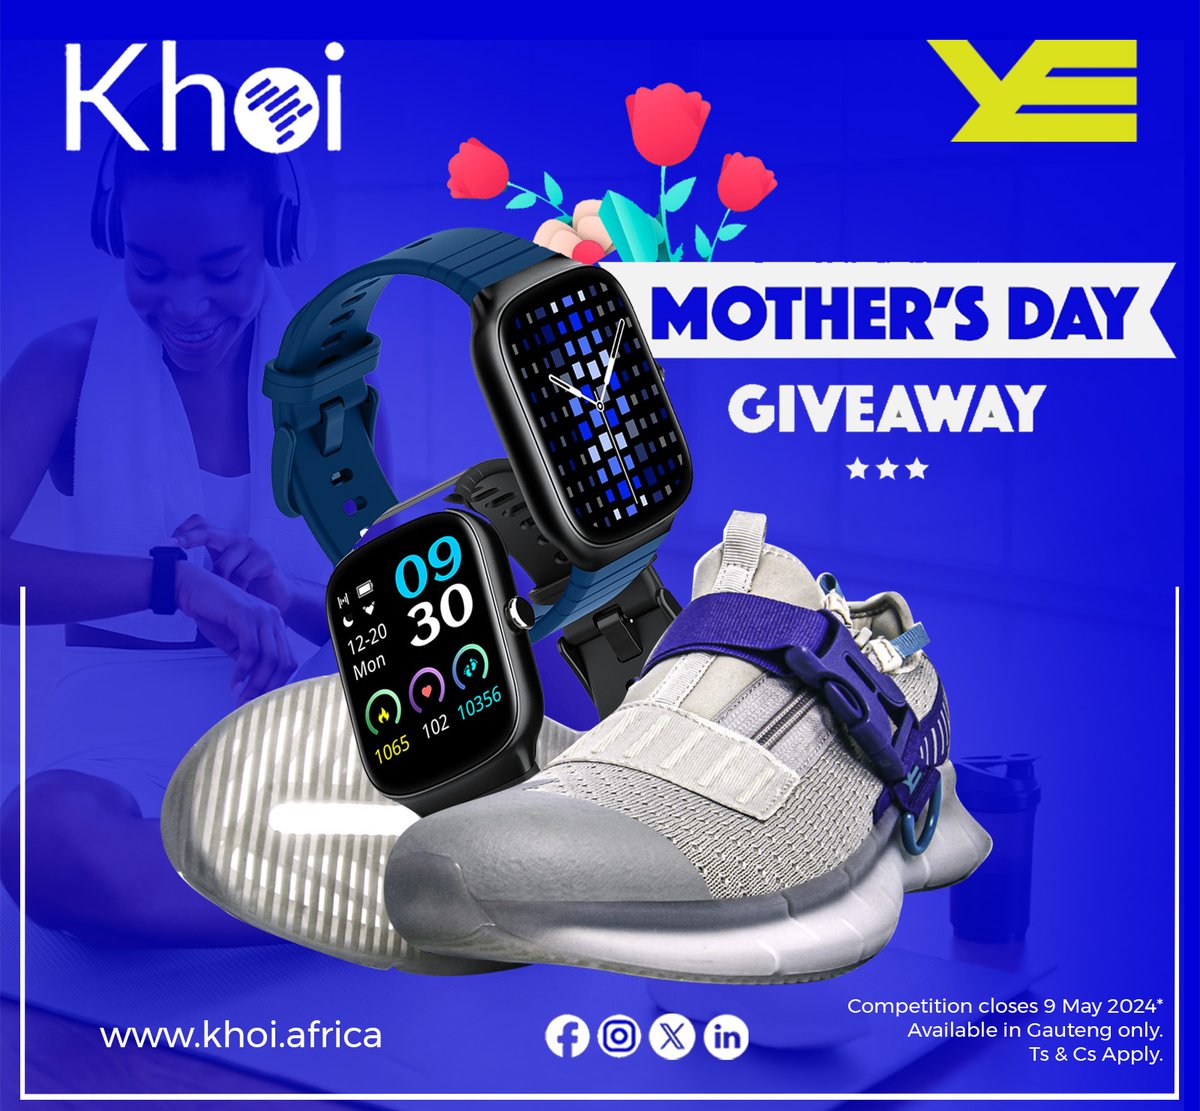 Win the ultimate #mothersdaygift !
1. Tell us why your mom is the best in the comments, 
2. follow @KhoiAfrica and @yenza_africa 
3. repost for a chance to surprise her with Yenza Fearless V1 sneakers + Khoi Afriwatch1 #smartwatch gift. Competition ends May 9th. 
Good luck! 🥳